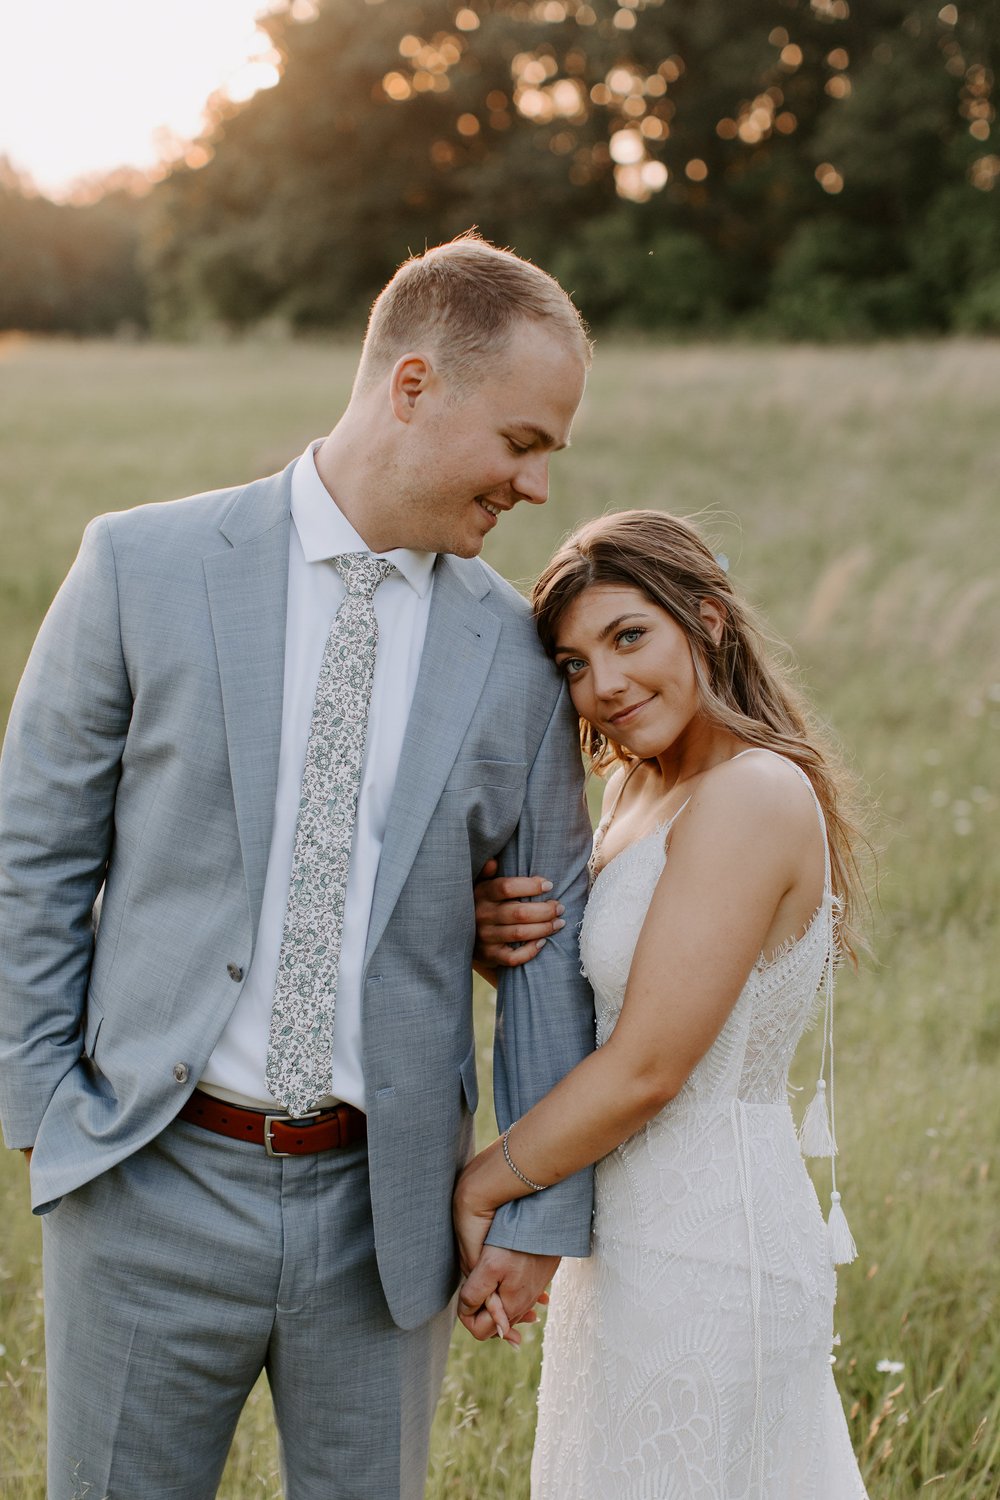 Couple embraces in wedding field sunset photos